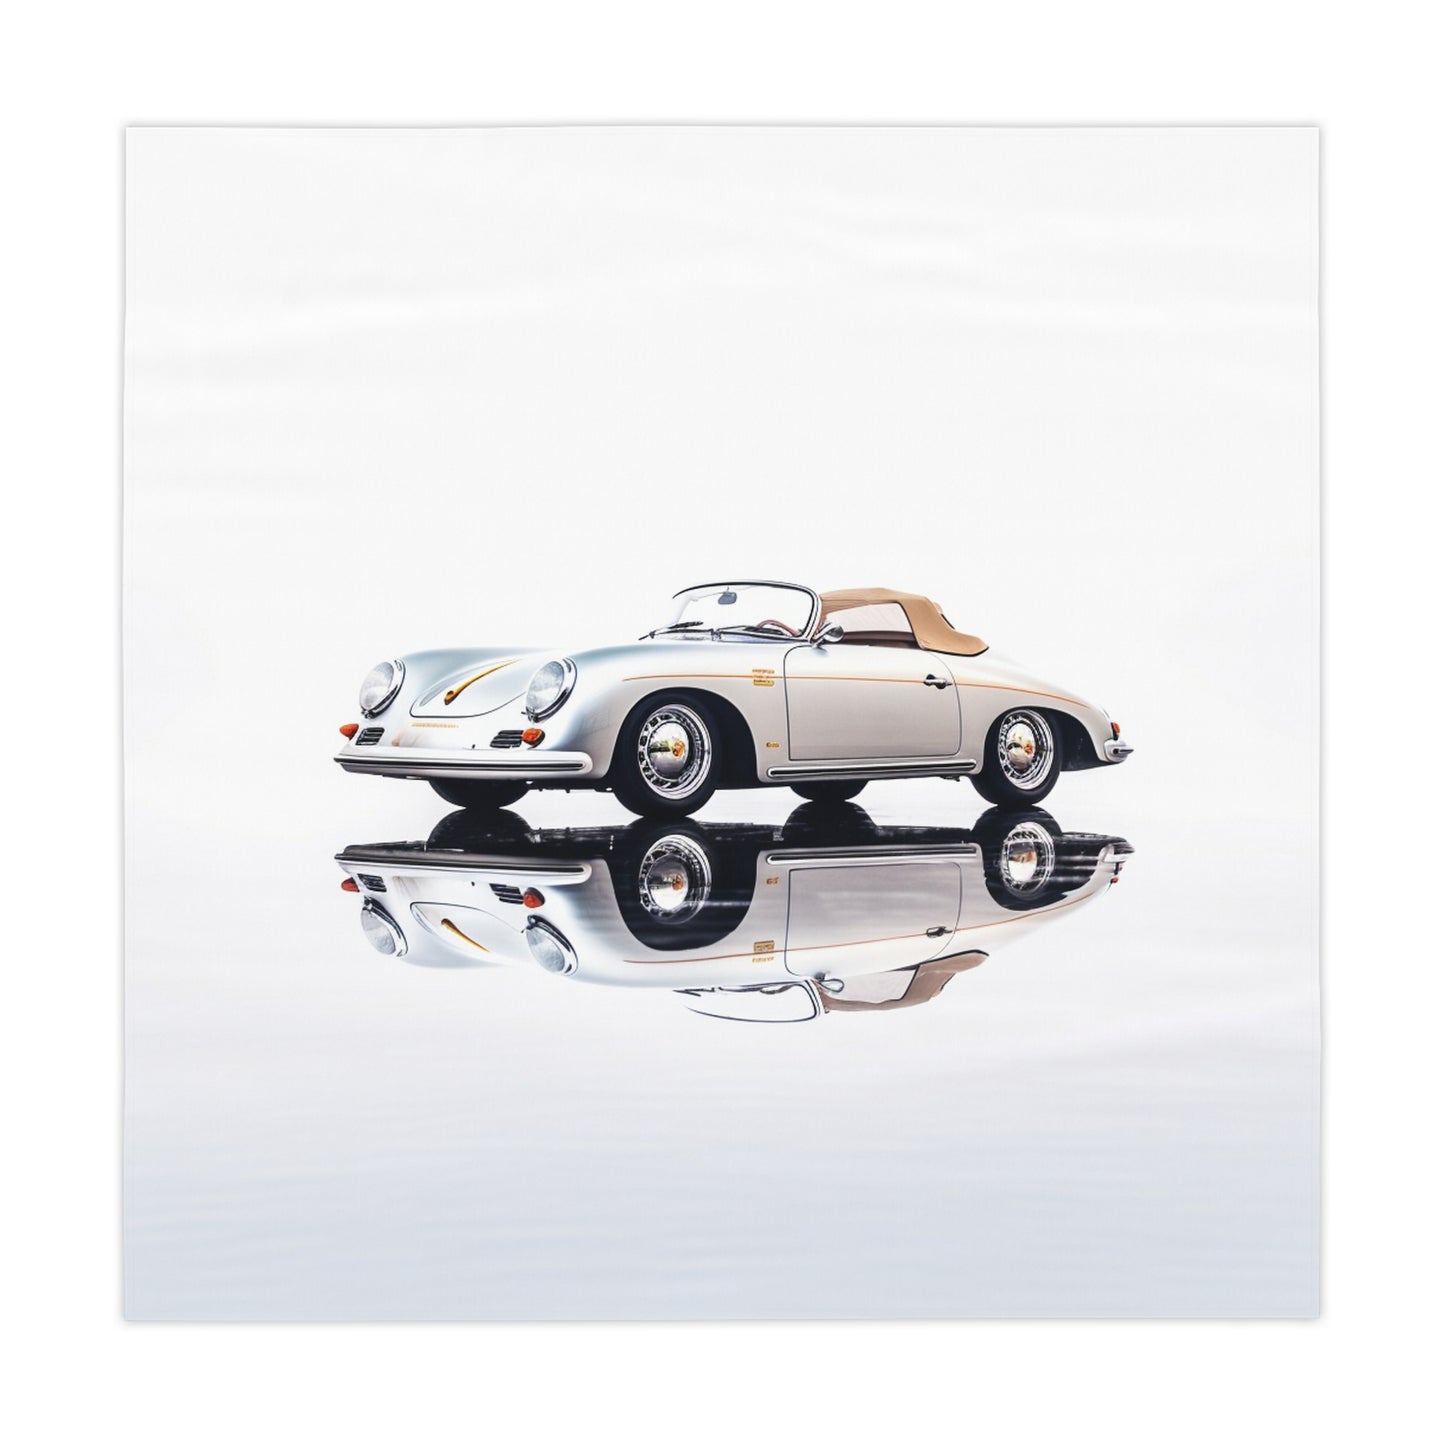 Tablecloth 911 Speedster on water 2